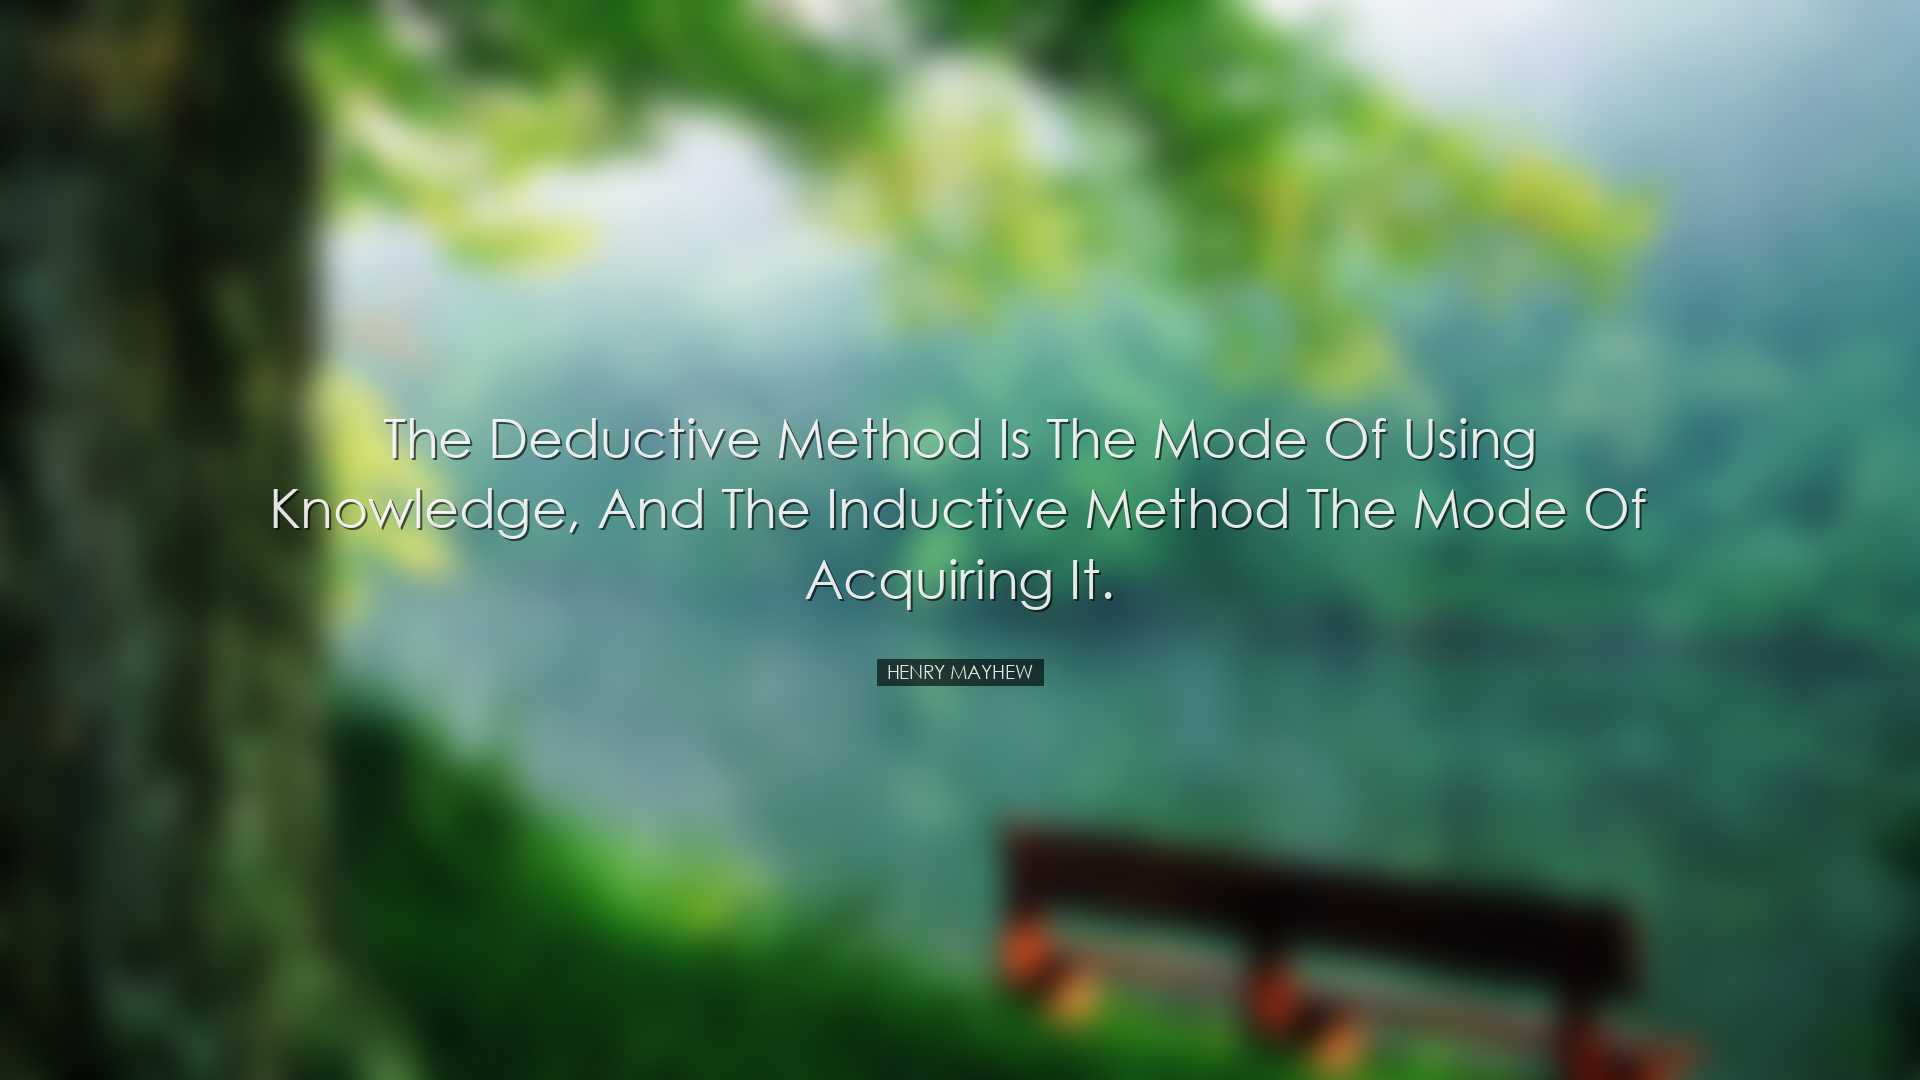 The deductive method is the mode of using knowledge, and the induc